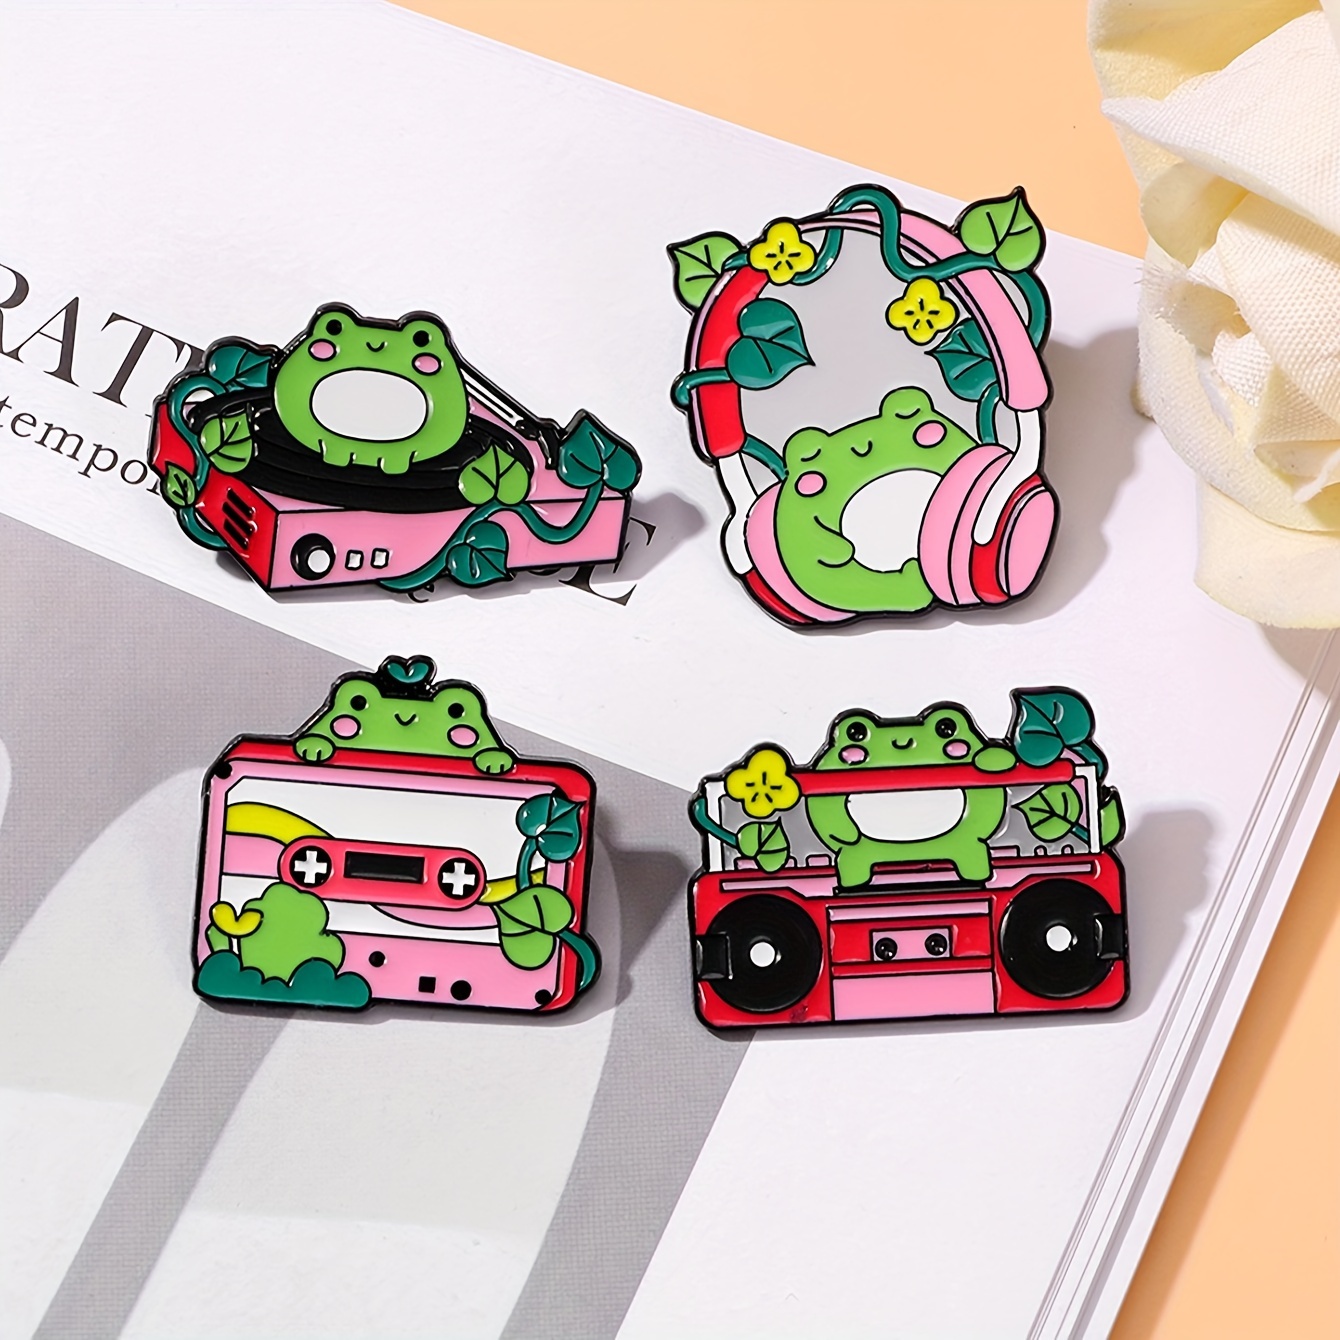 

Frogy Music Lovers: 4 Packs Of Enamel Pins Featuring Cute Frog Design - Perfect For Girls' Daily Wear And Unique Fashion Accessories